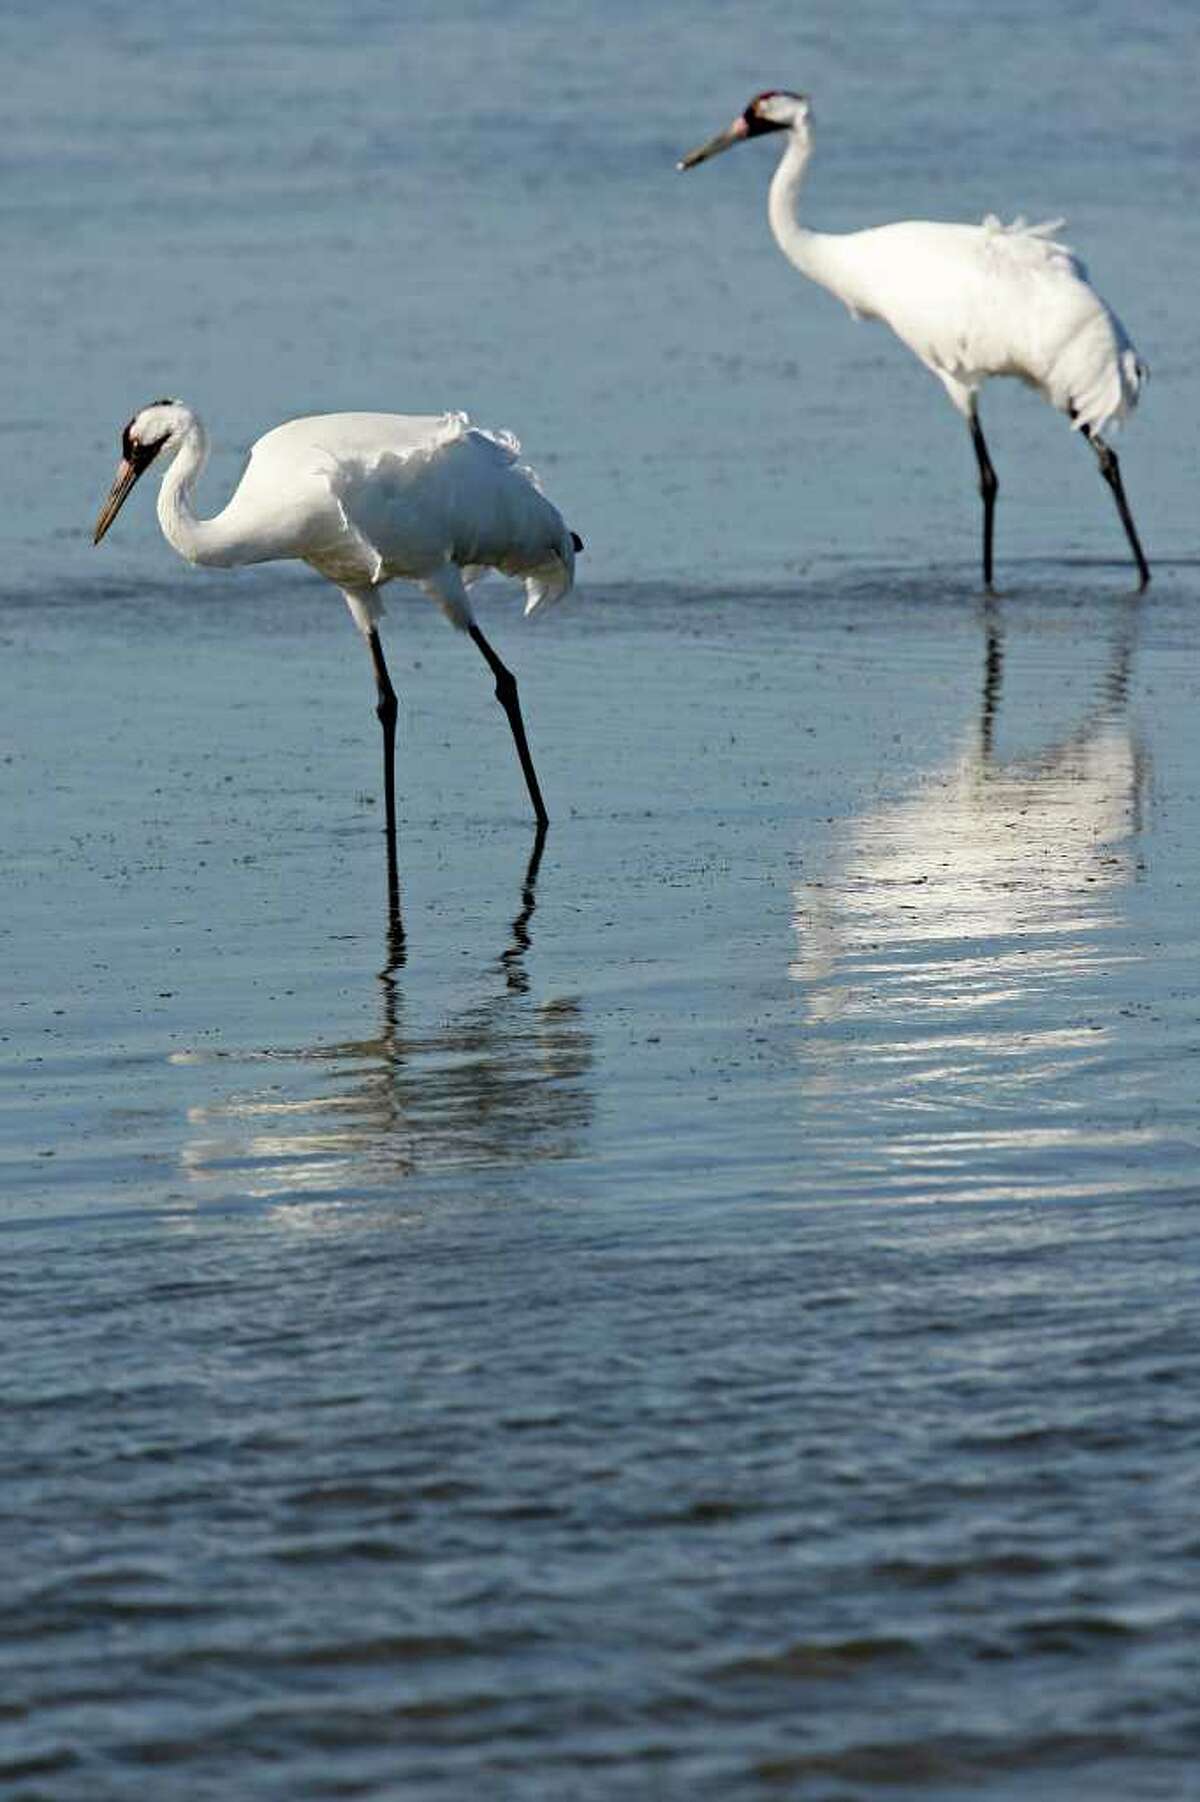 A couple of whooping cranes feed in the Aransas National Wildlife Refuge, Tuesday, Nov. 29, 2011. Area folks are suing the state for control of water from the rivers that empty into the refuges. With the ongoing drought and low river water flow, high salinity in the waters of the bay caused a bloom of red tide that lead to the closing of the oyster season and the decline in blue crabs. The crabs are the main source of food for the cranes. Proponents of the lawsuit state that excessive pumping of the fresh waters from the river systems has contributed to current conditions.